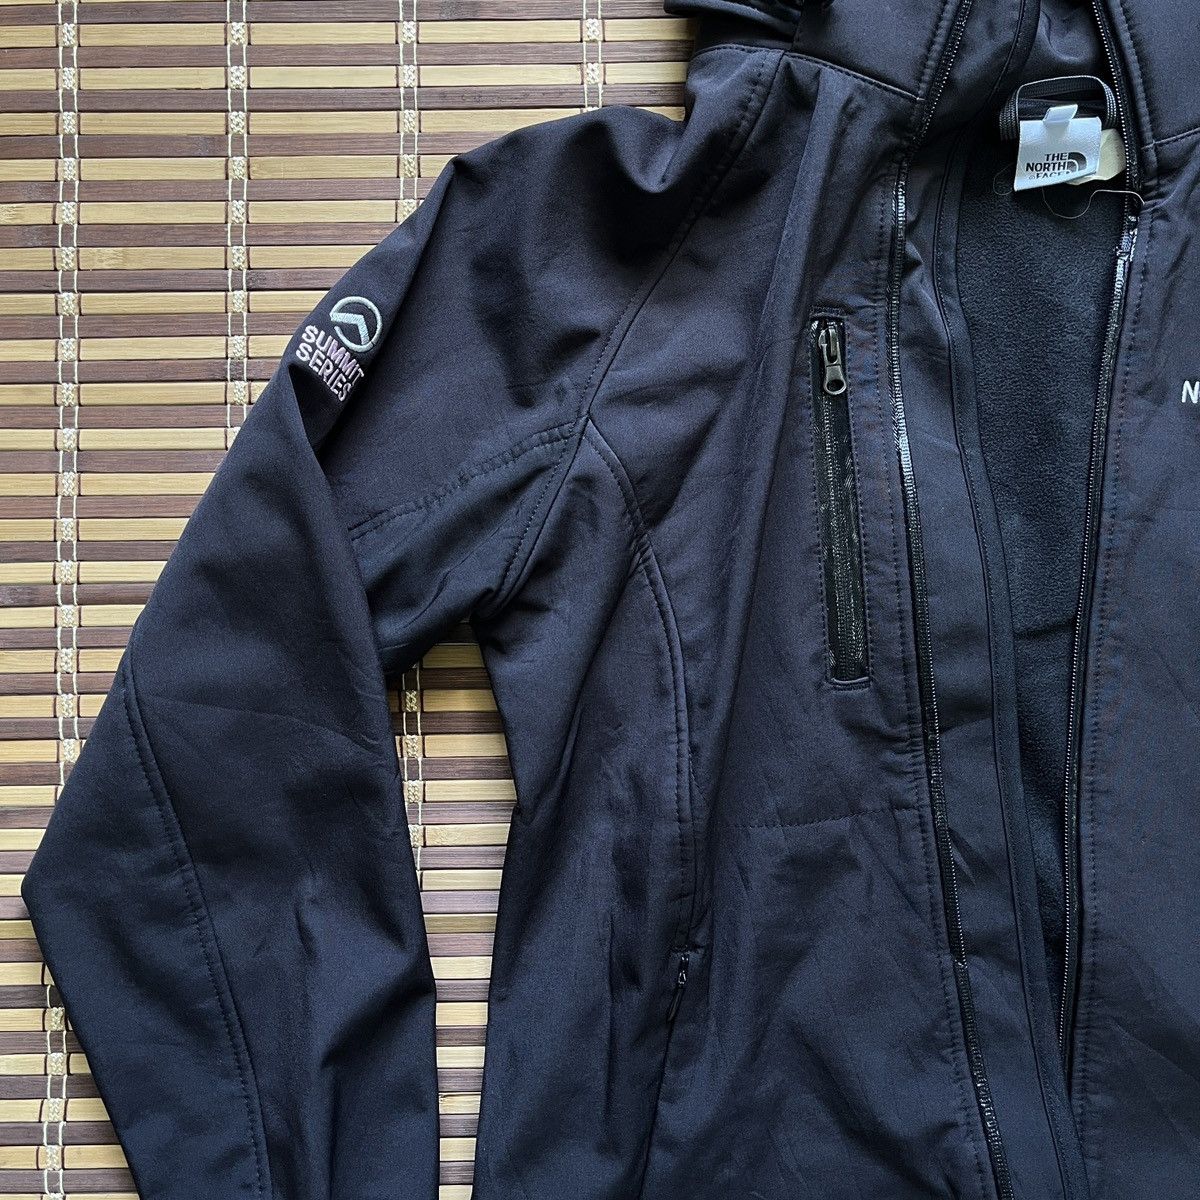 Outdoor Style Go Out! - The North Face X Goretex Summit Series Jacket - 5